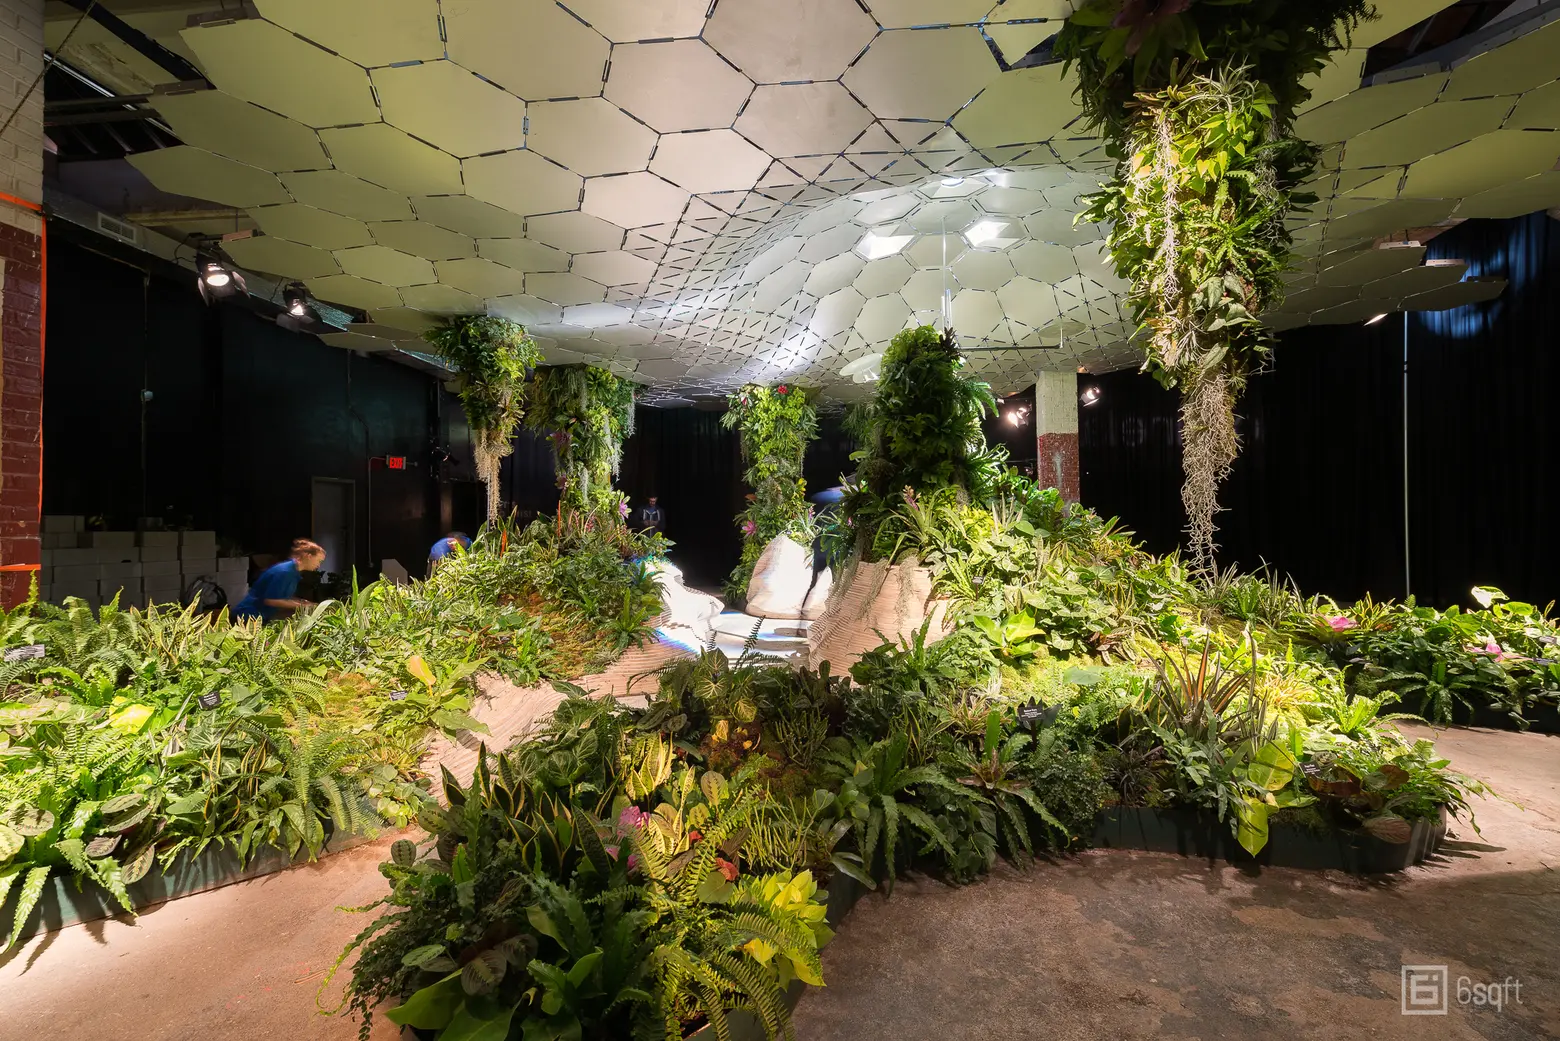 Lowline team releases official proposal for $83M underground park